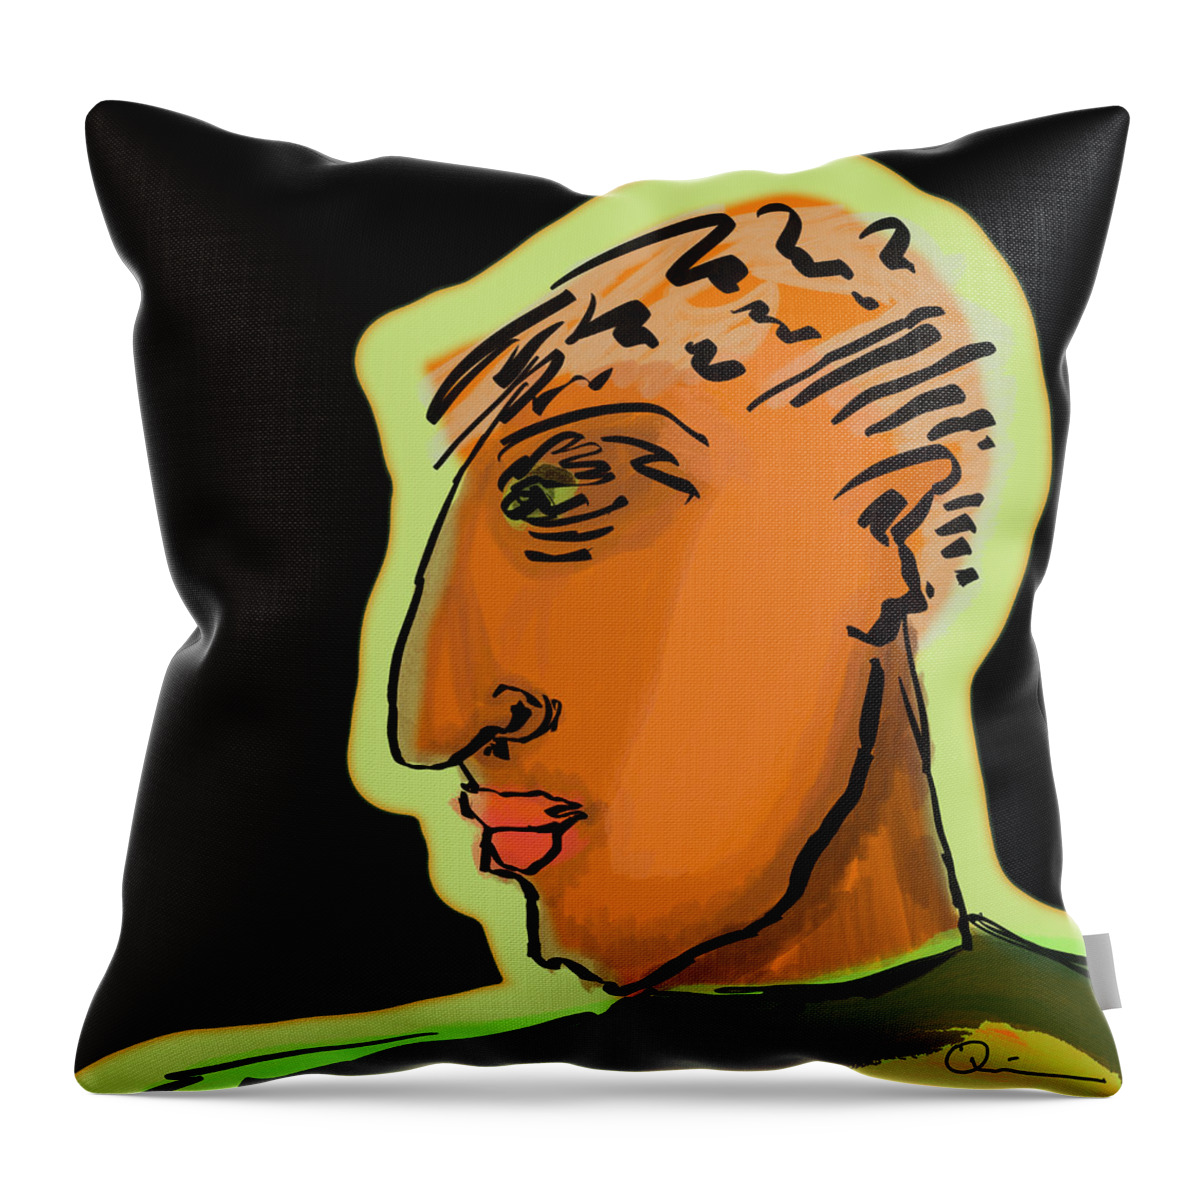 Quiros Throw Pillow featuring the digital art Being 4 by Jeffrey Quiros